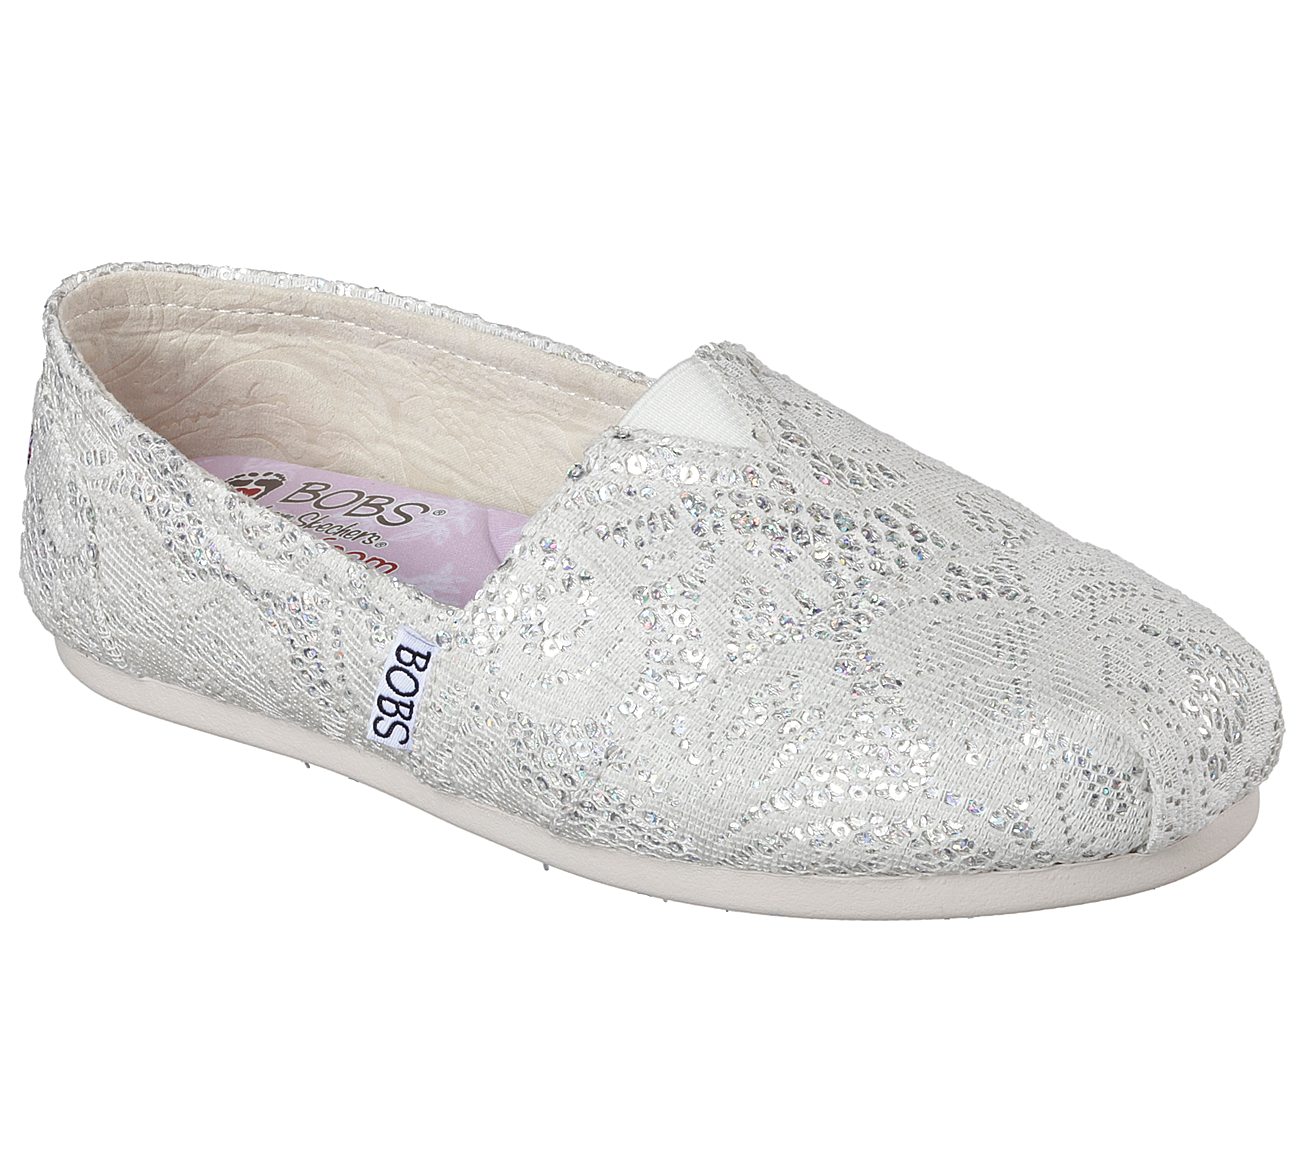 bobs white lace shoes off 65% - online 